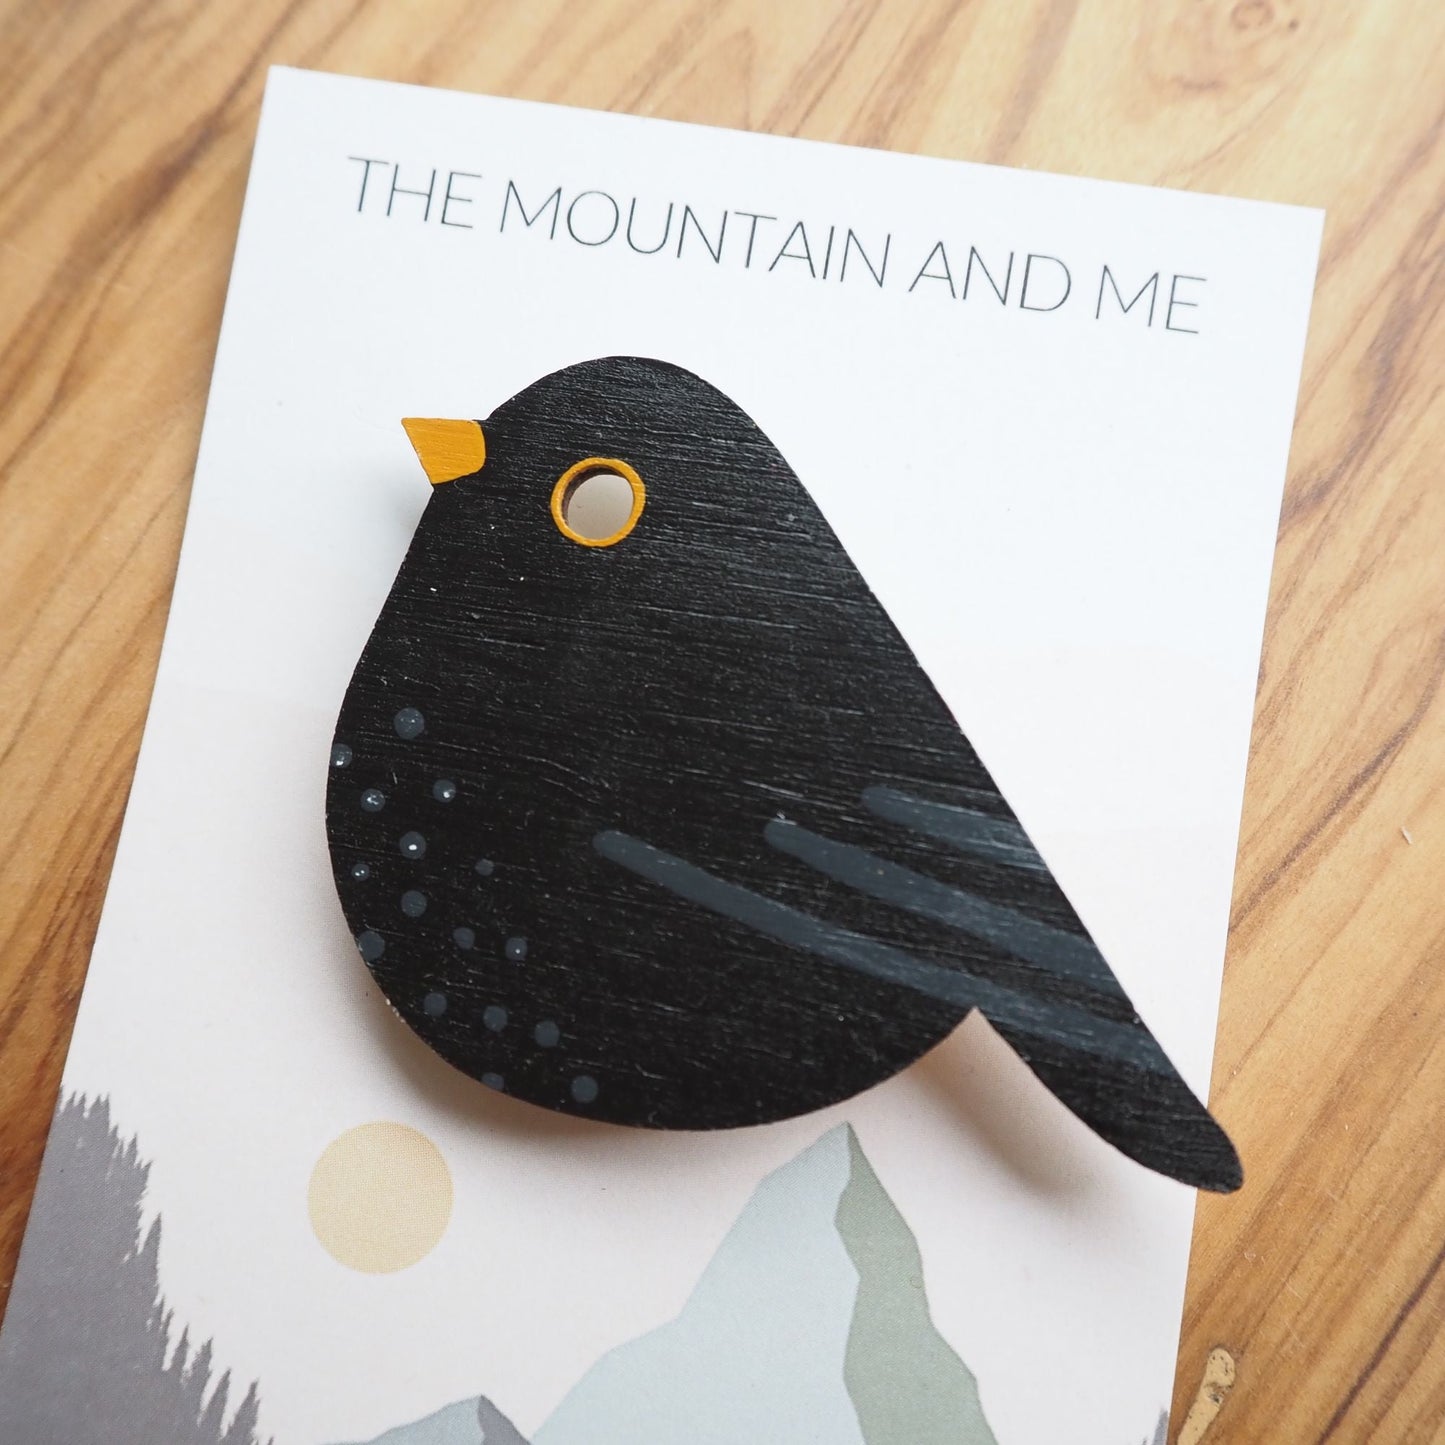 Load image into Gallery viewer, Painted blackbird brooch on the Mountain and Me branded backing card.
